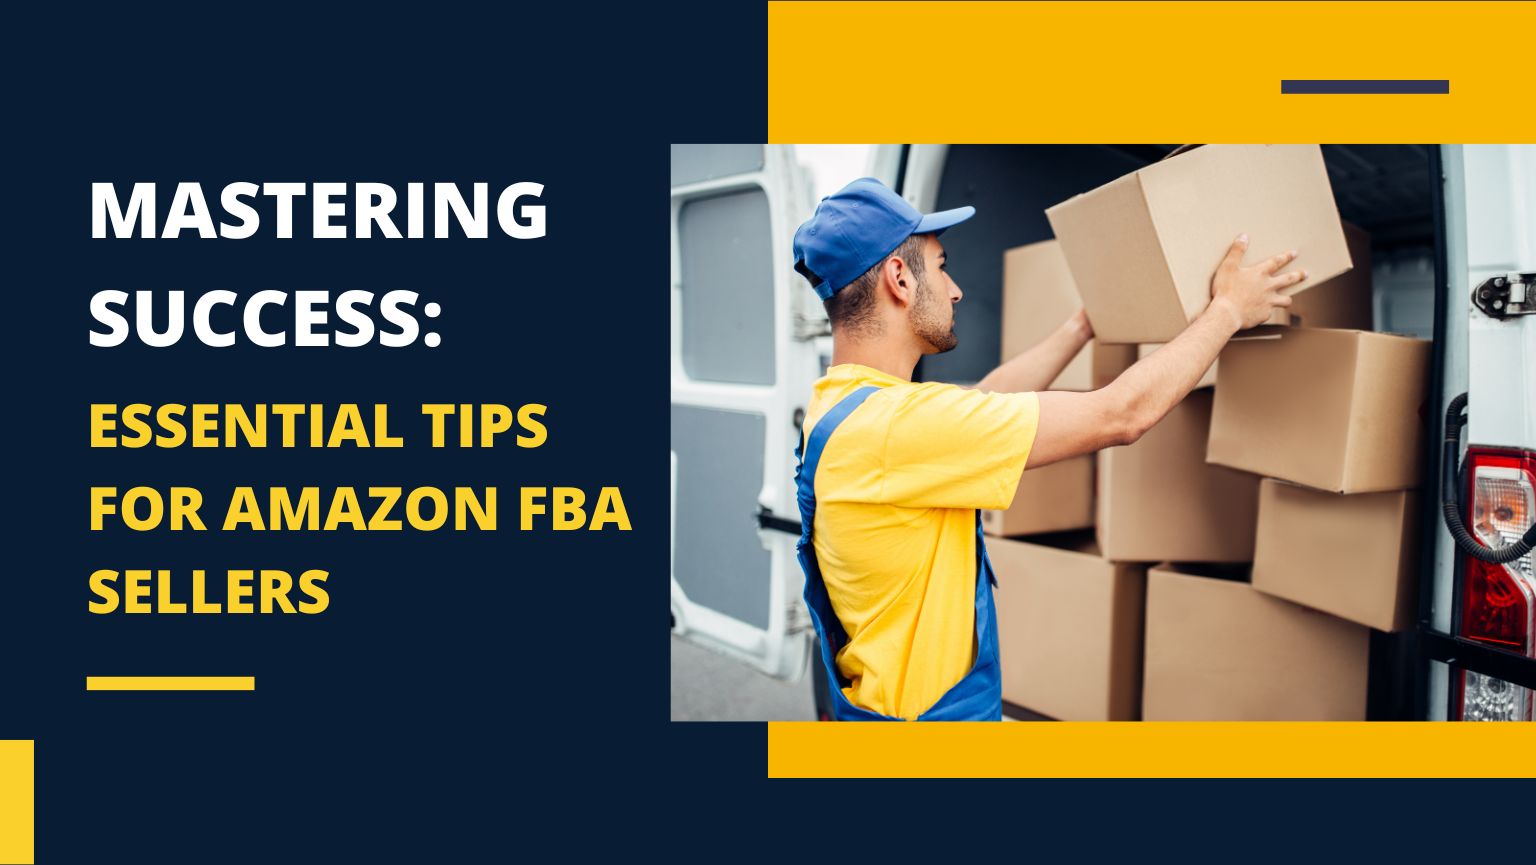 Essential Tips for Amazon FBA Sellers